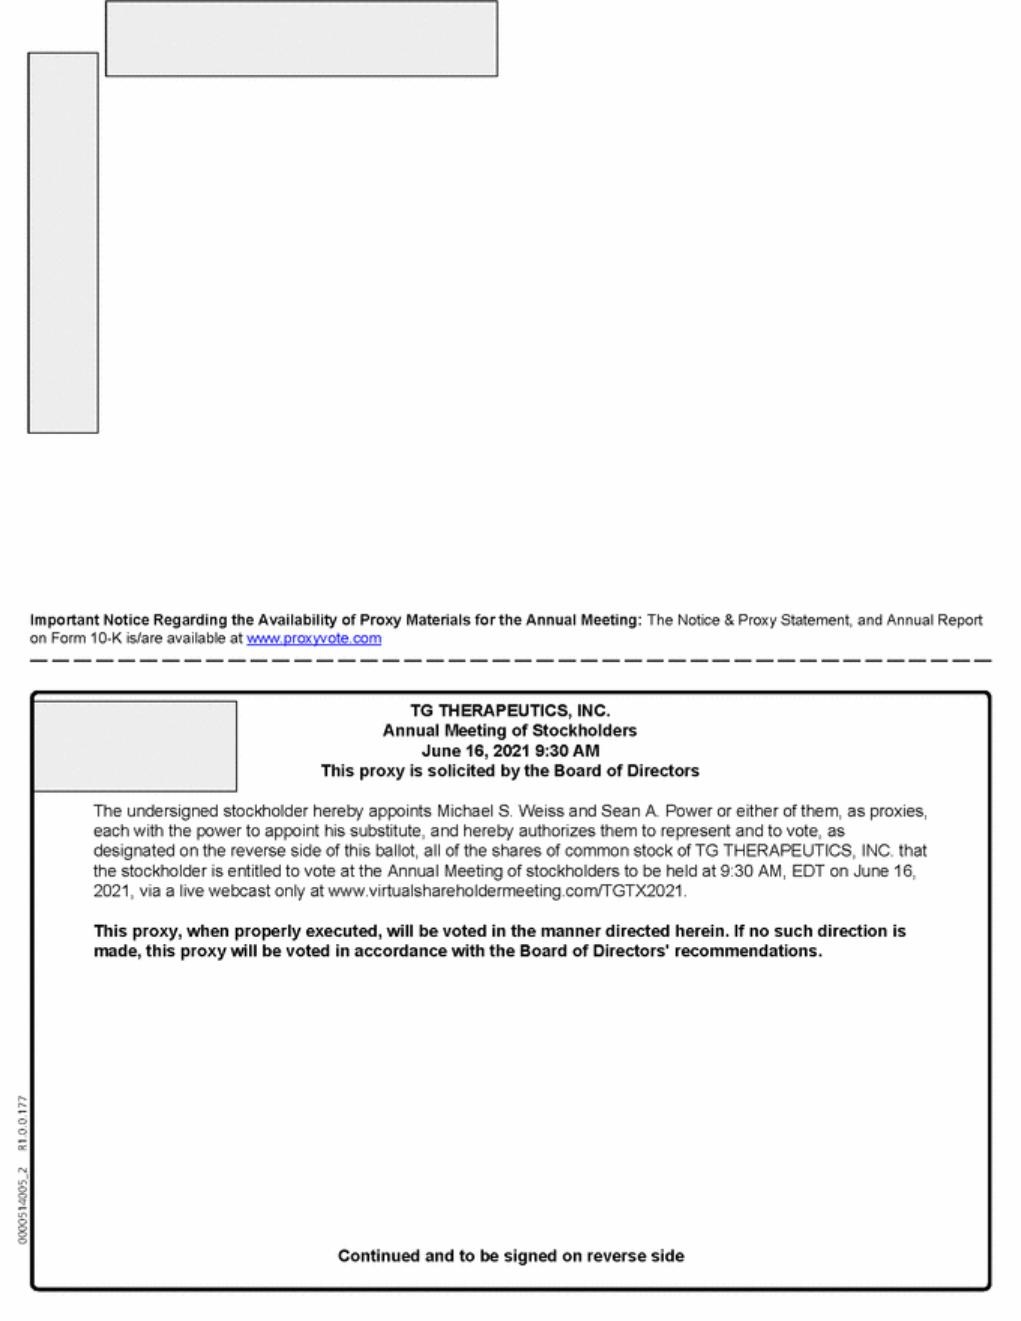 New Microsoft Word Document_registered_page_2.gif